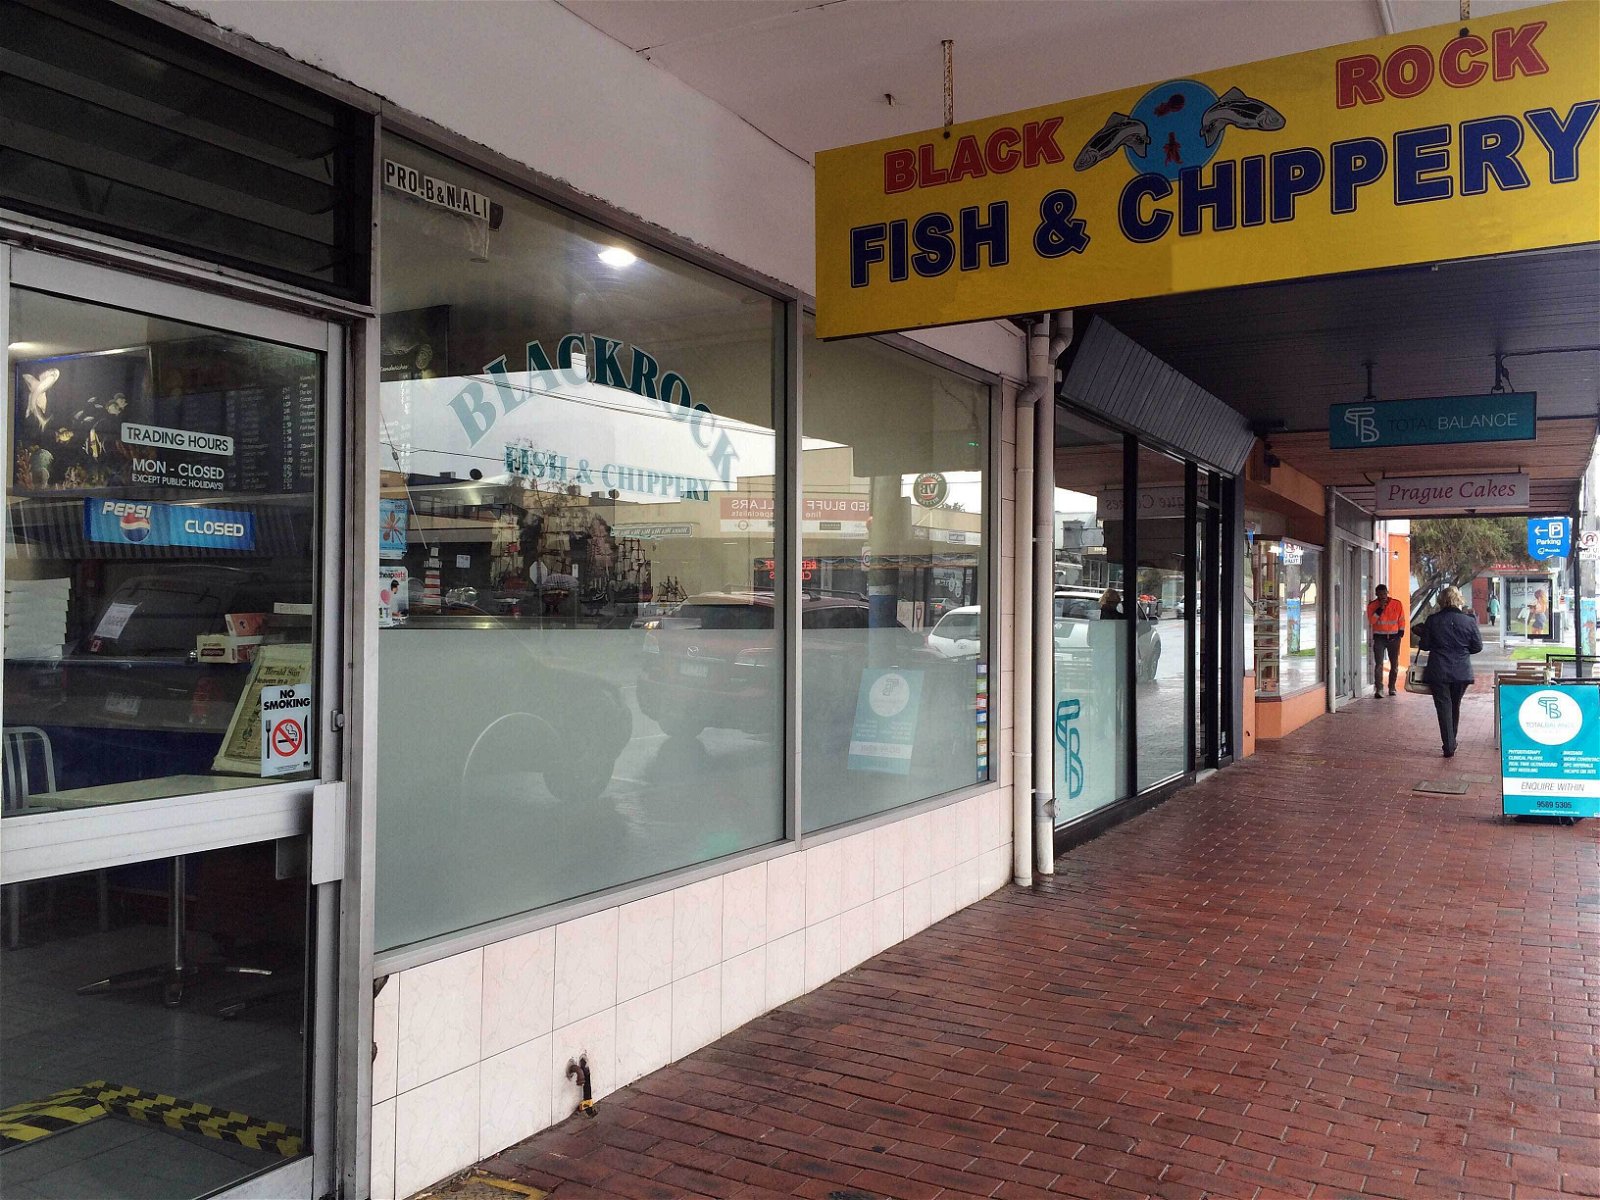 Black Rock Fish And Chippery - Accommodation Find 0